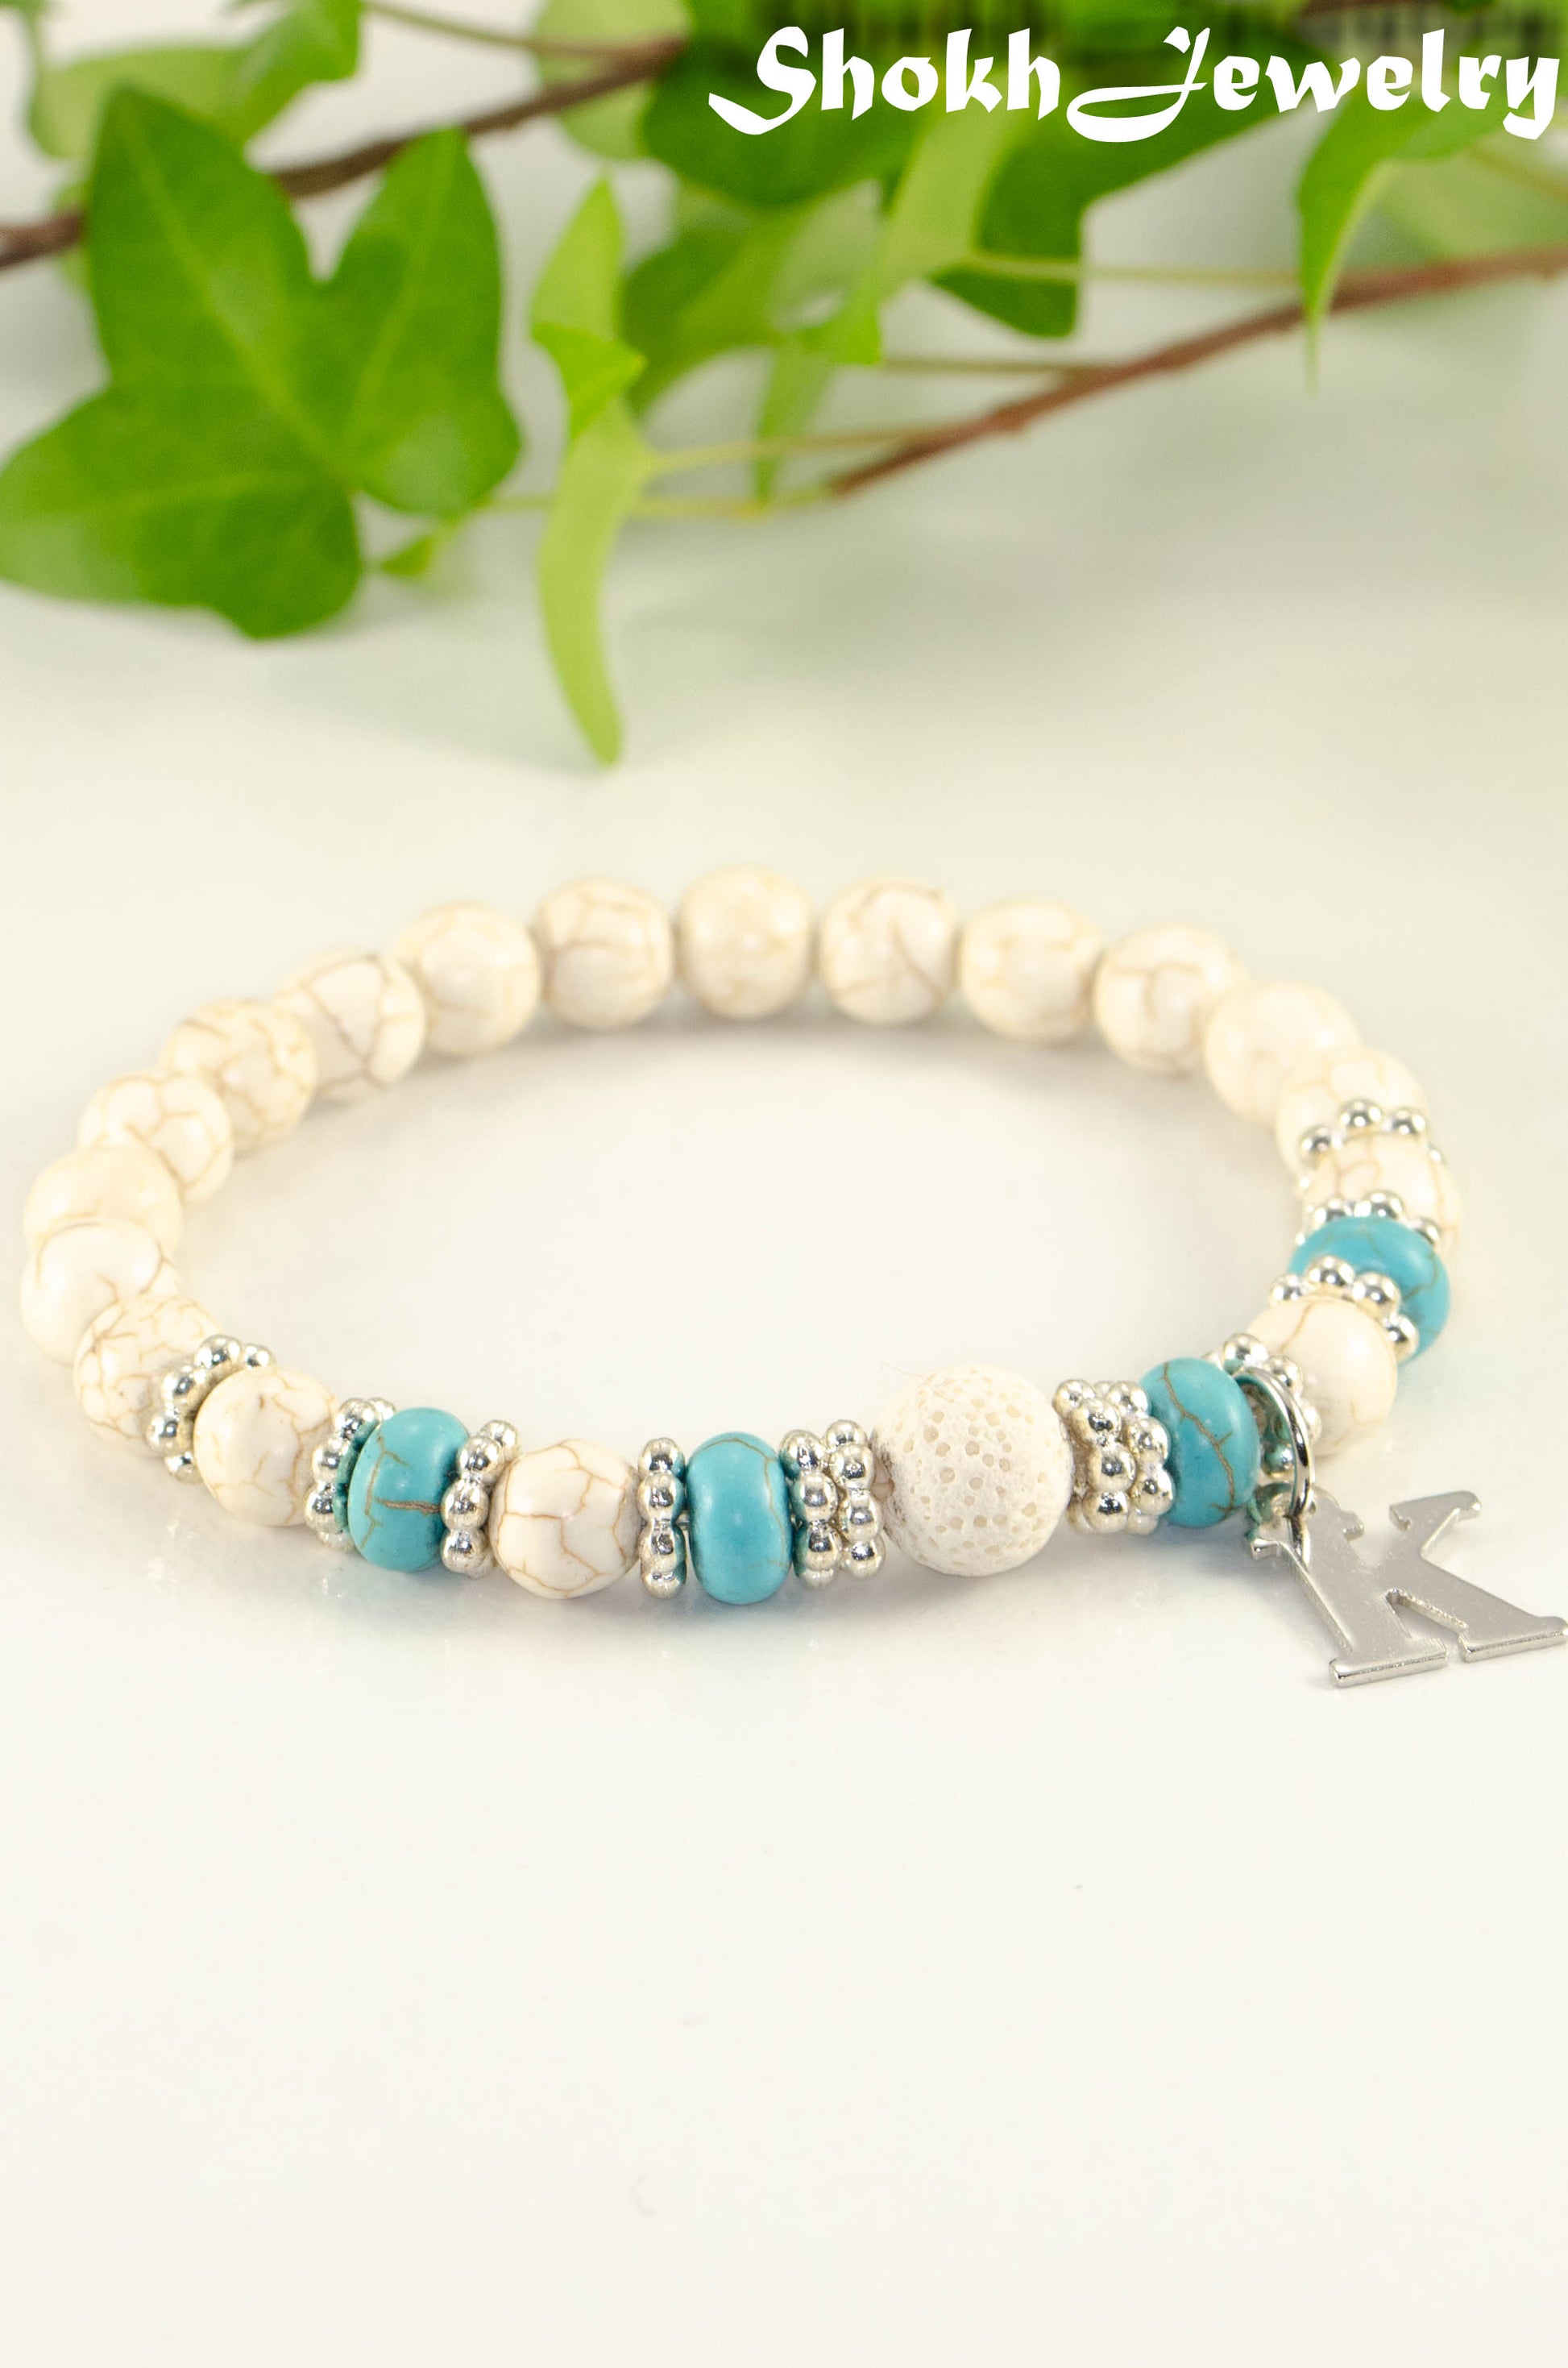 White Howlite and Lava Stone Bracelet with Initial.